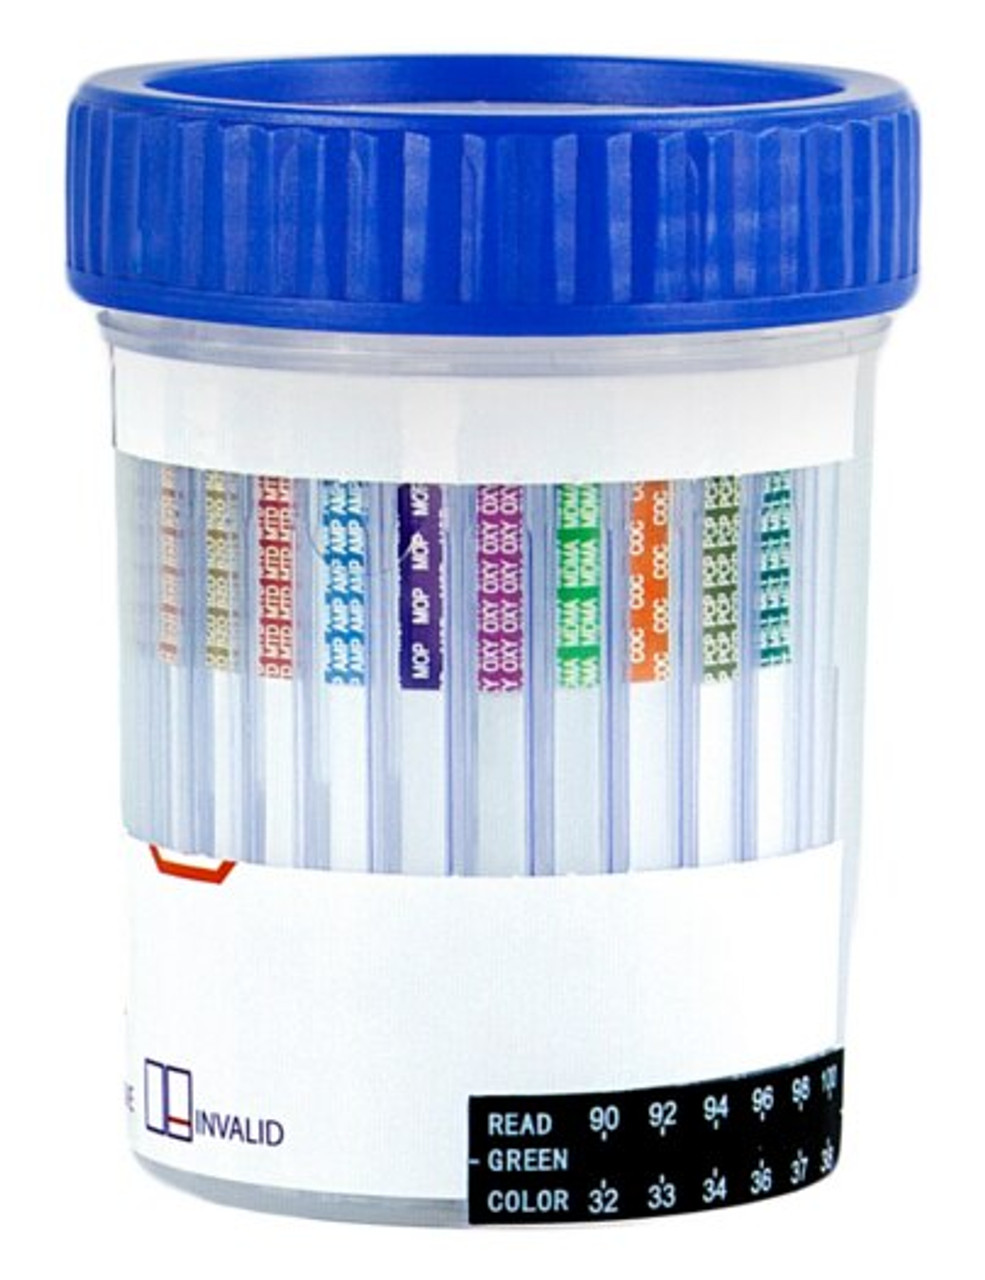 10 Panel Multi-Drug Screen Test Cup with K2 Spice